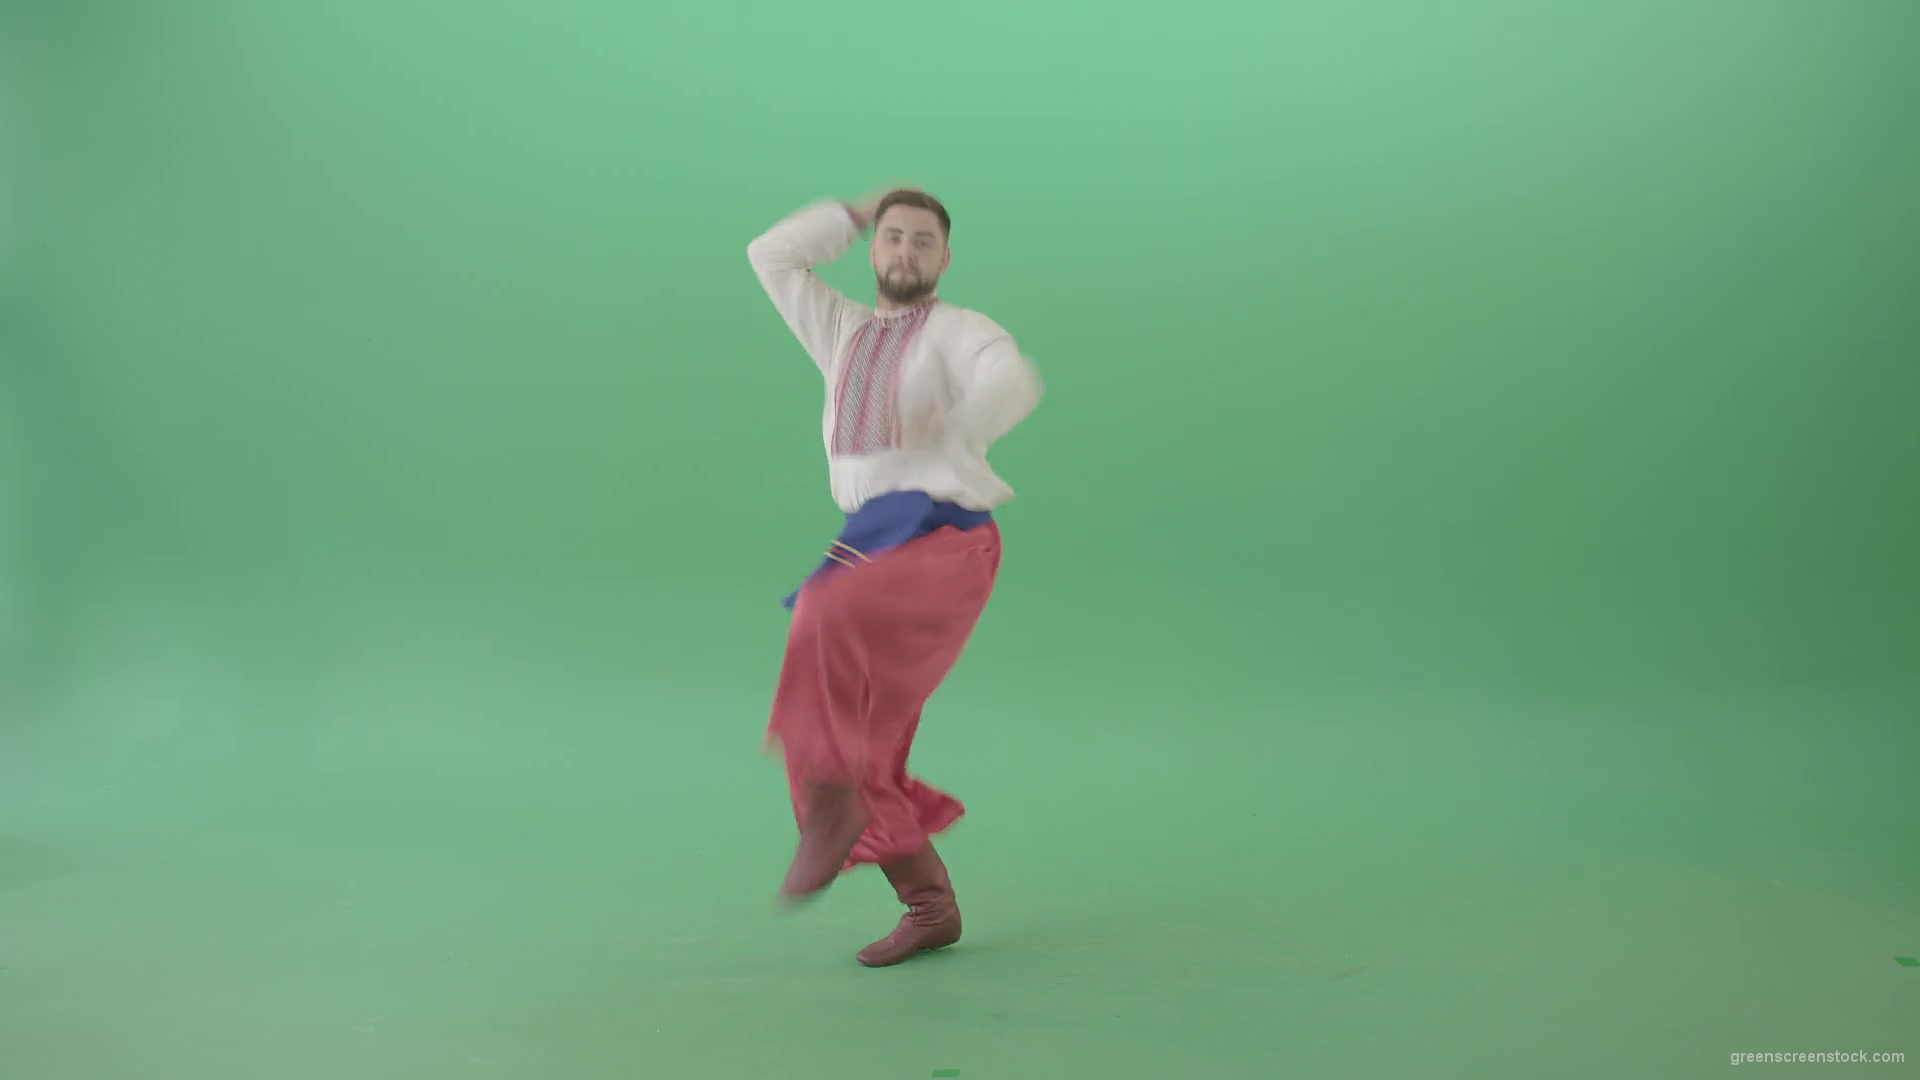 Slavic-Ukraine-folk-dance-by-UA-Cossack-man-jumping-isolated-on-Green-Background-4K-Video-Footage-1920_009 Green Screen Stock